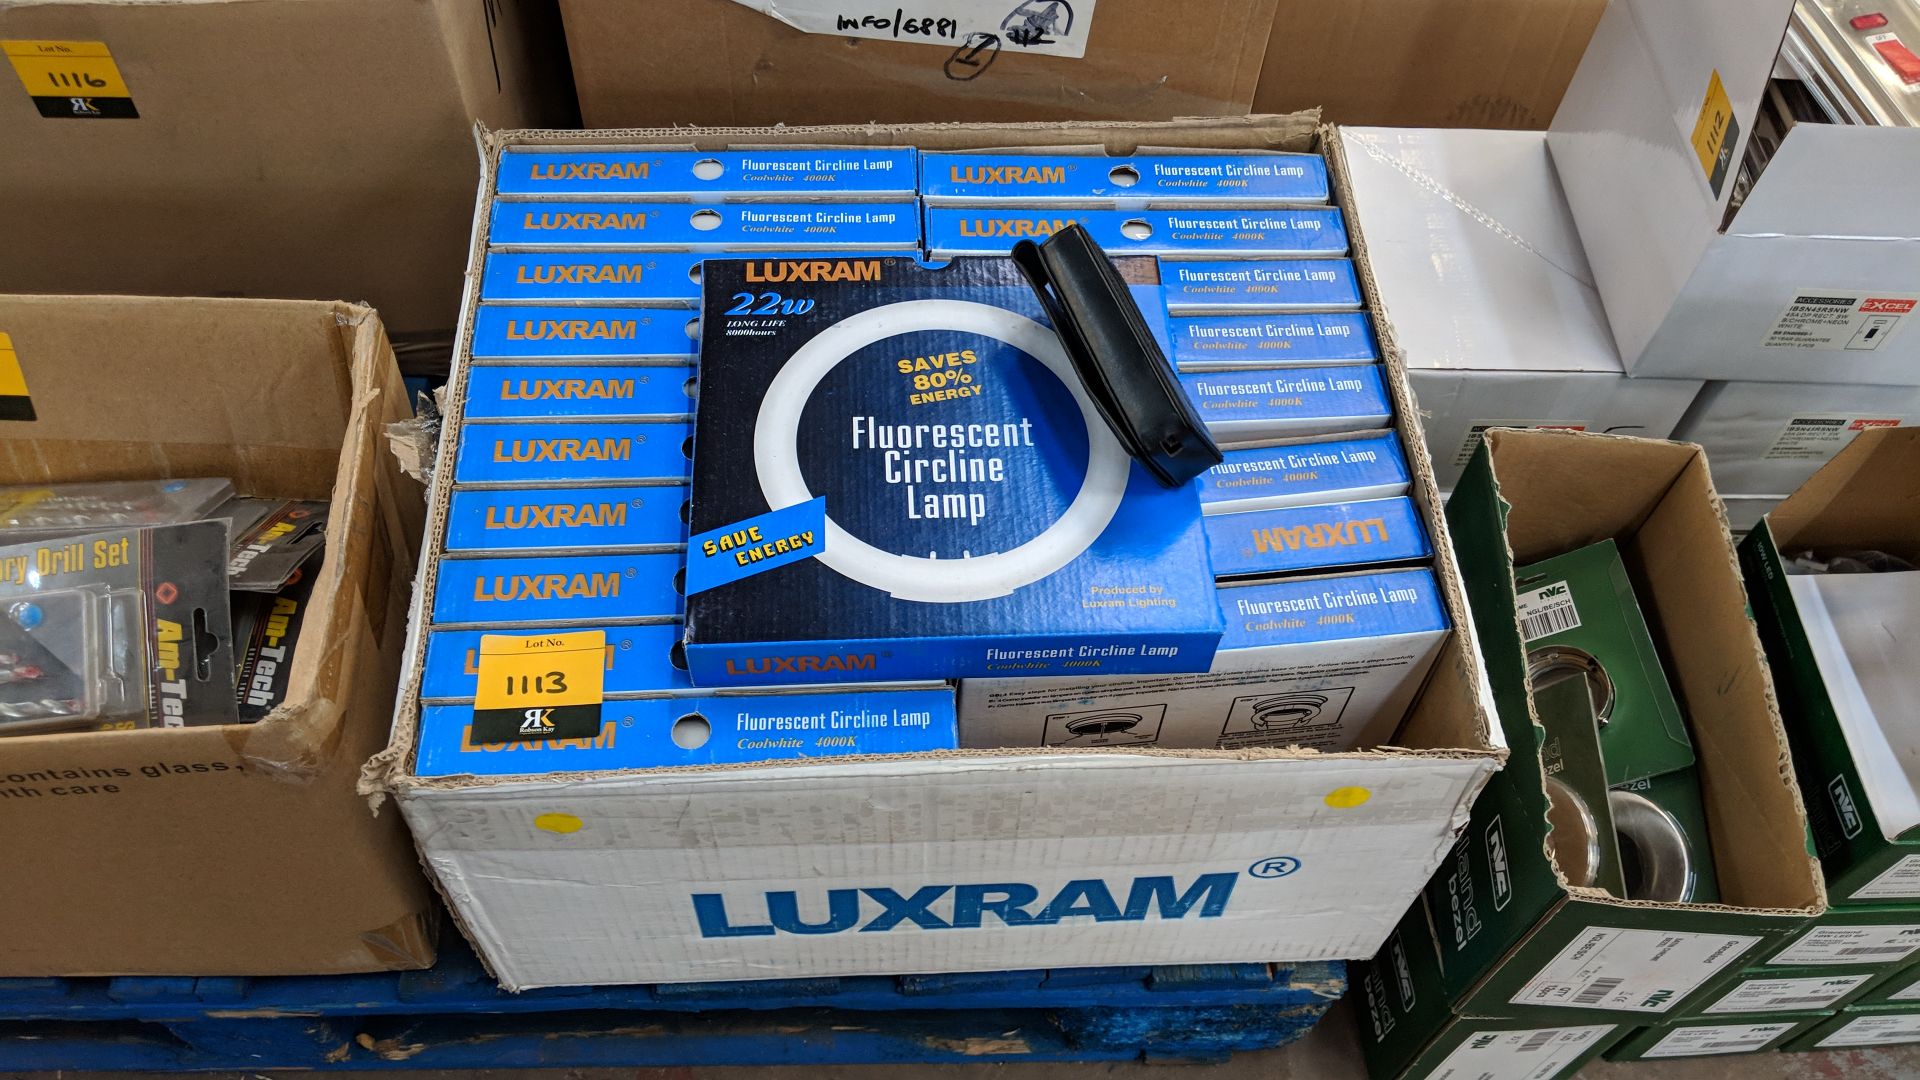 19 off Luxram 22W fluorescent Circline lamps The vast majority of products in this auction appear